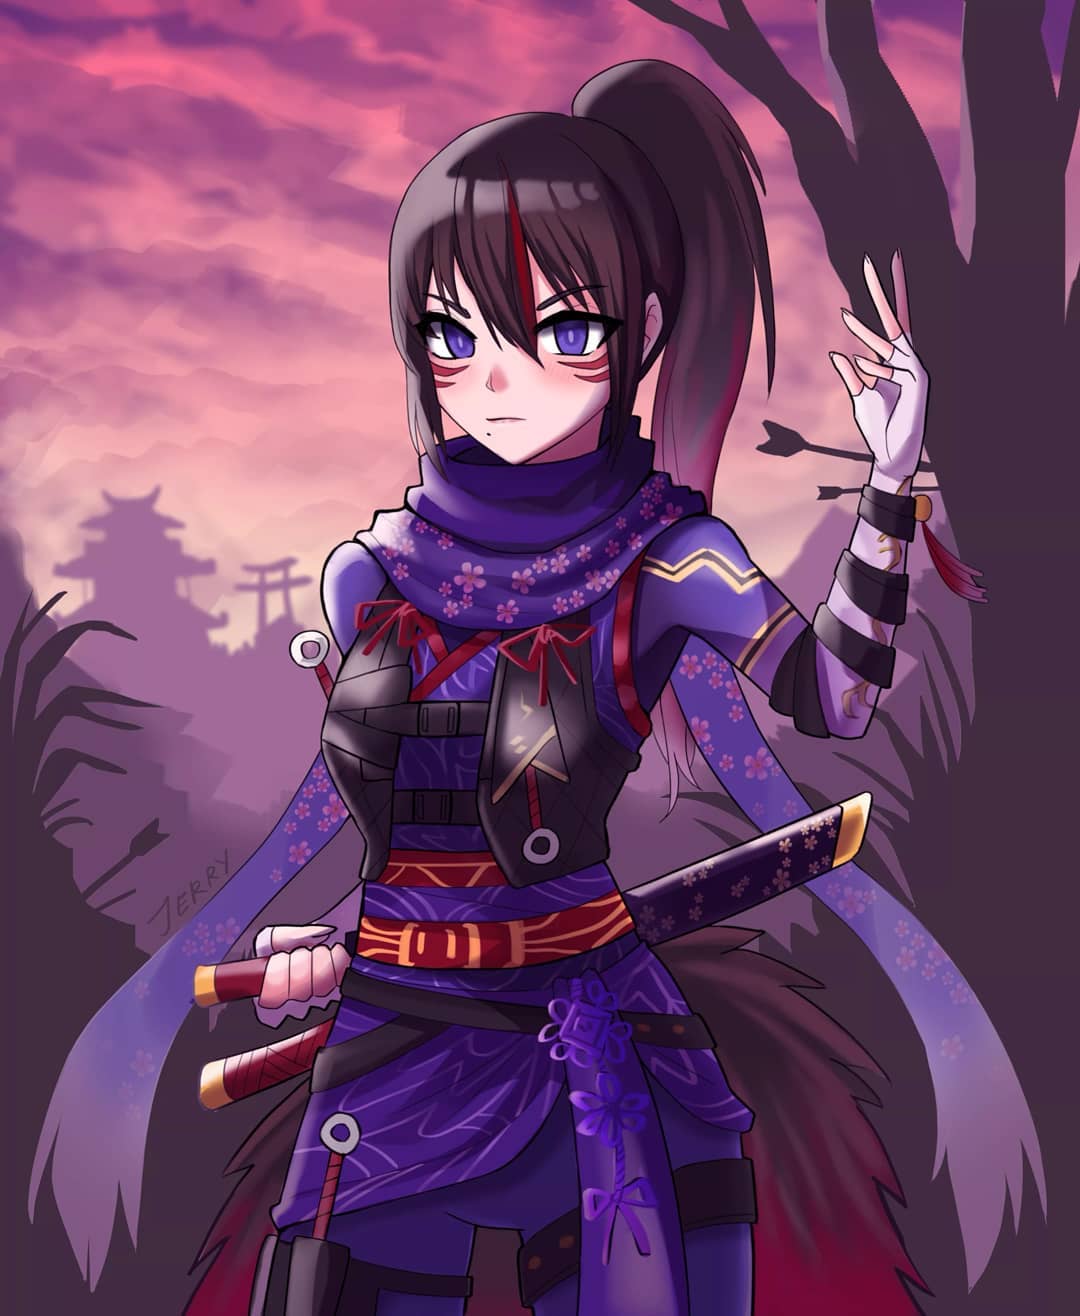 alluring black_and_red_and_purple_hair cute highres insanely_hot kunimitsu_ii kunoichi namco outdoors sunset tekken violet_eyes